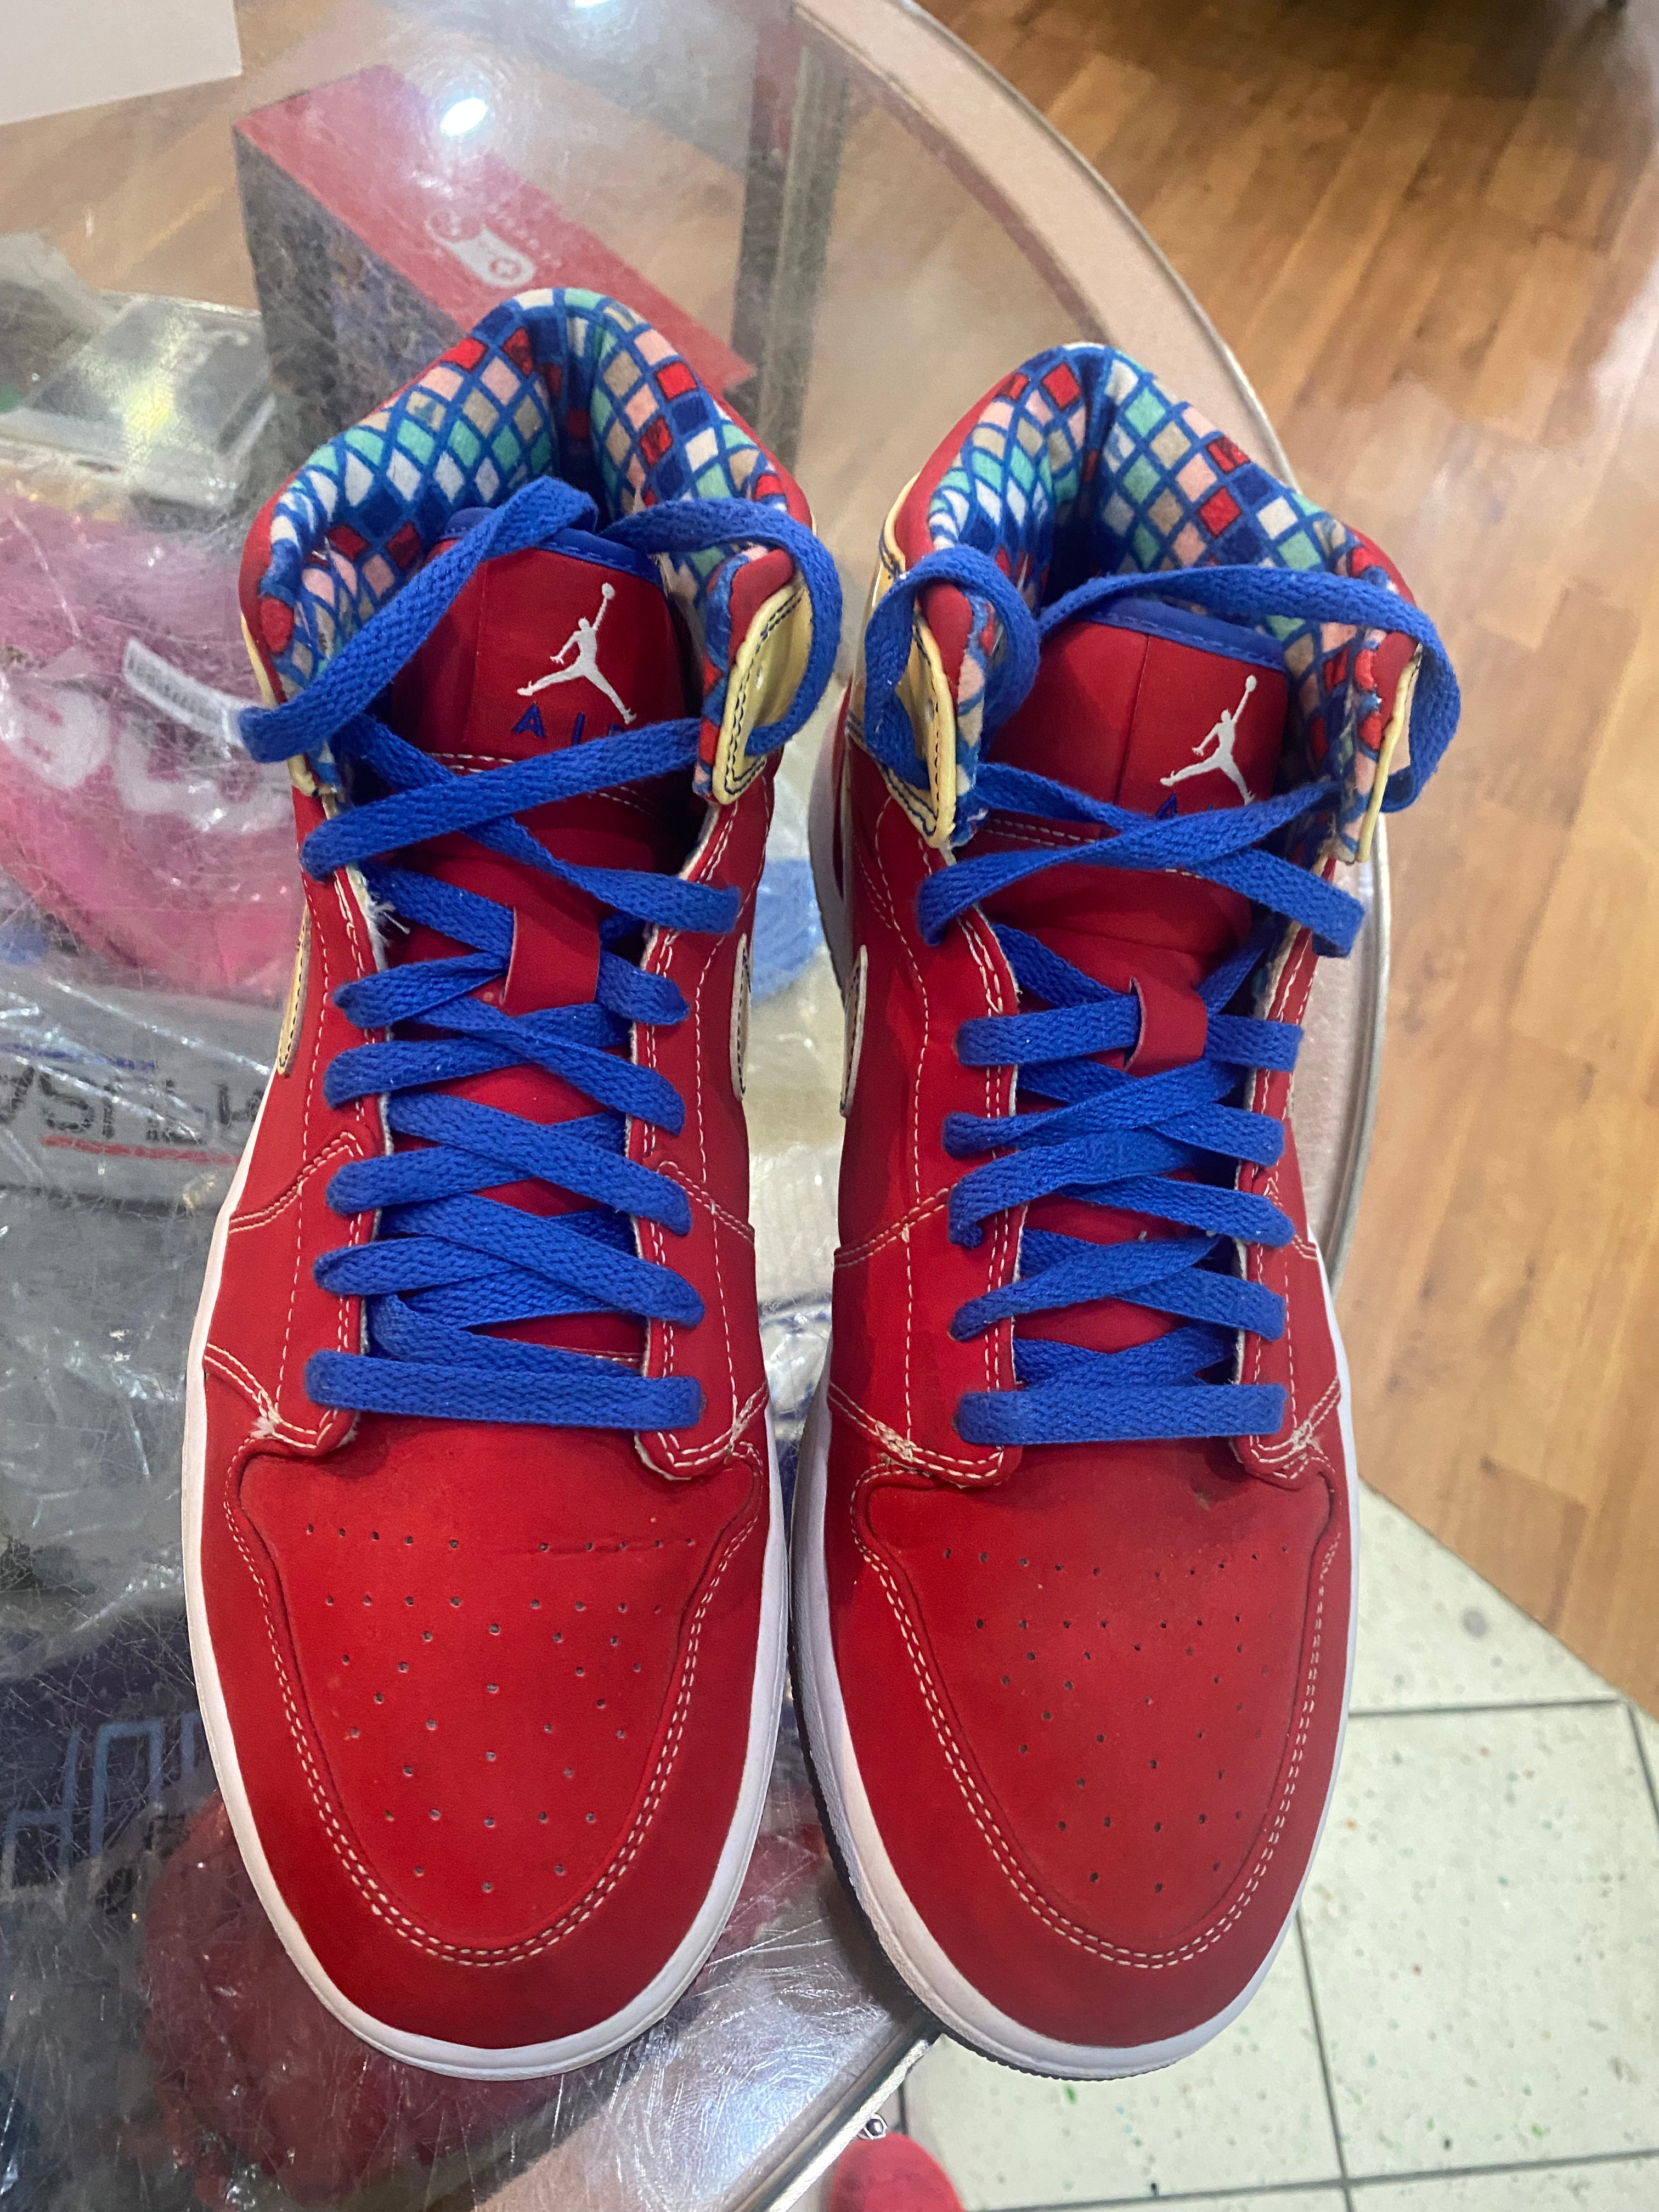 LS Sport Red 1s size 10